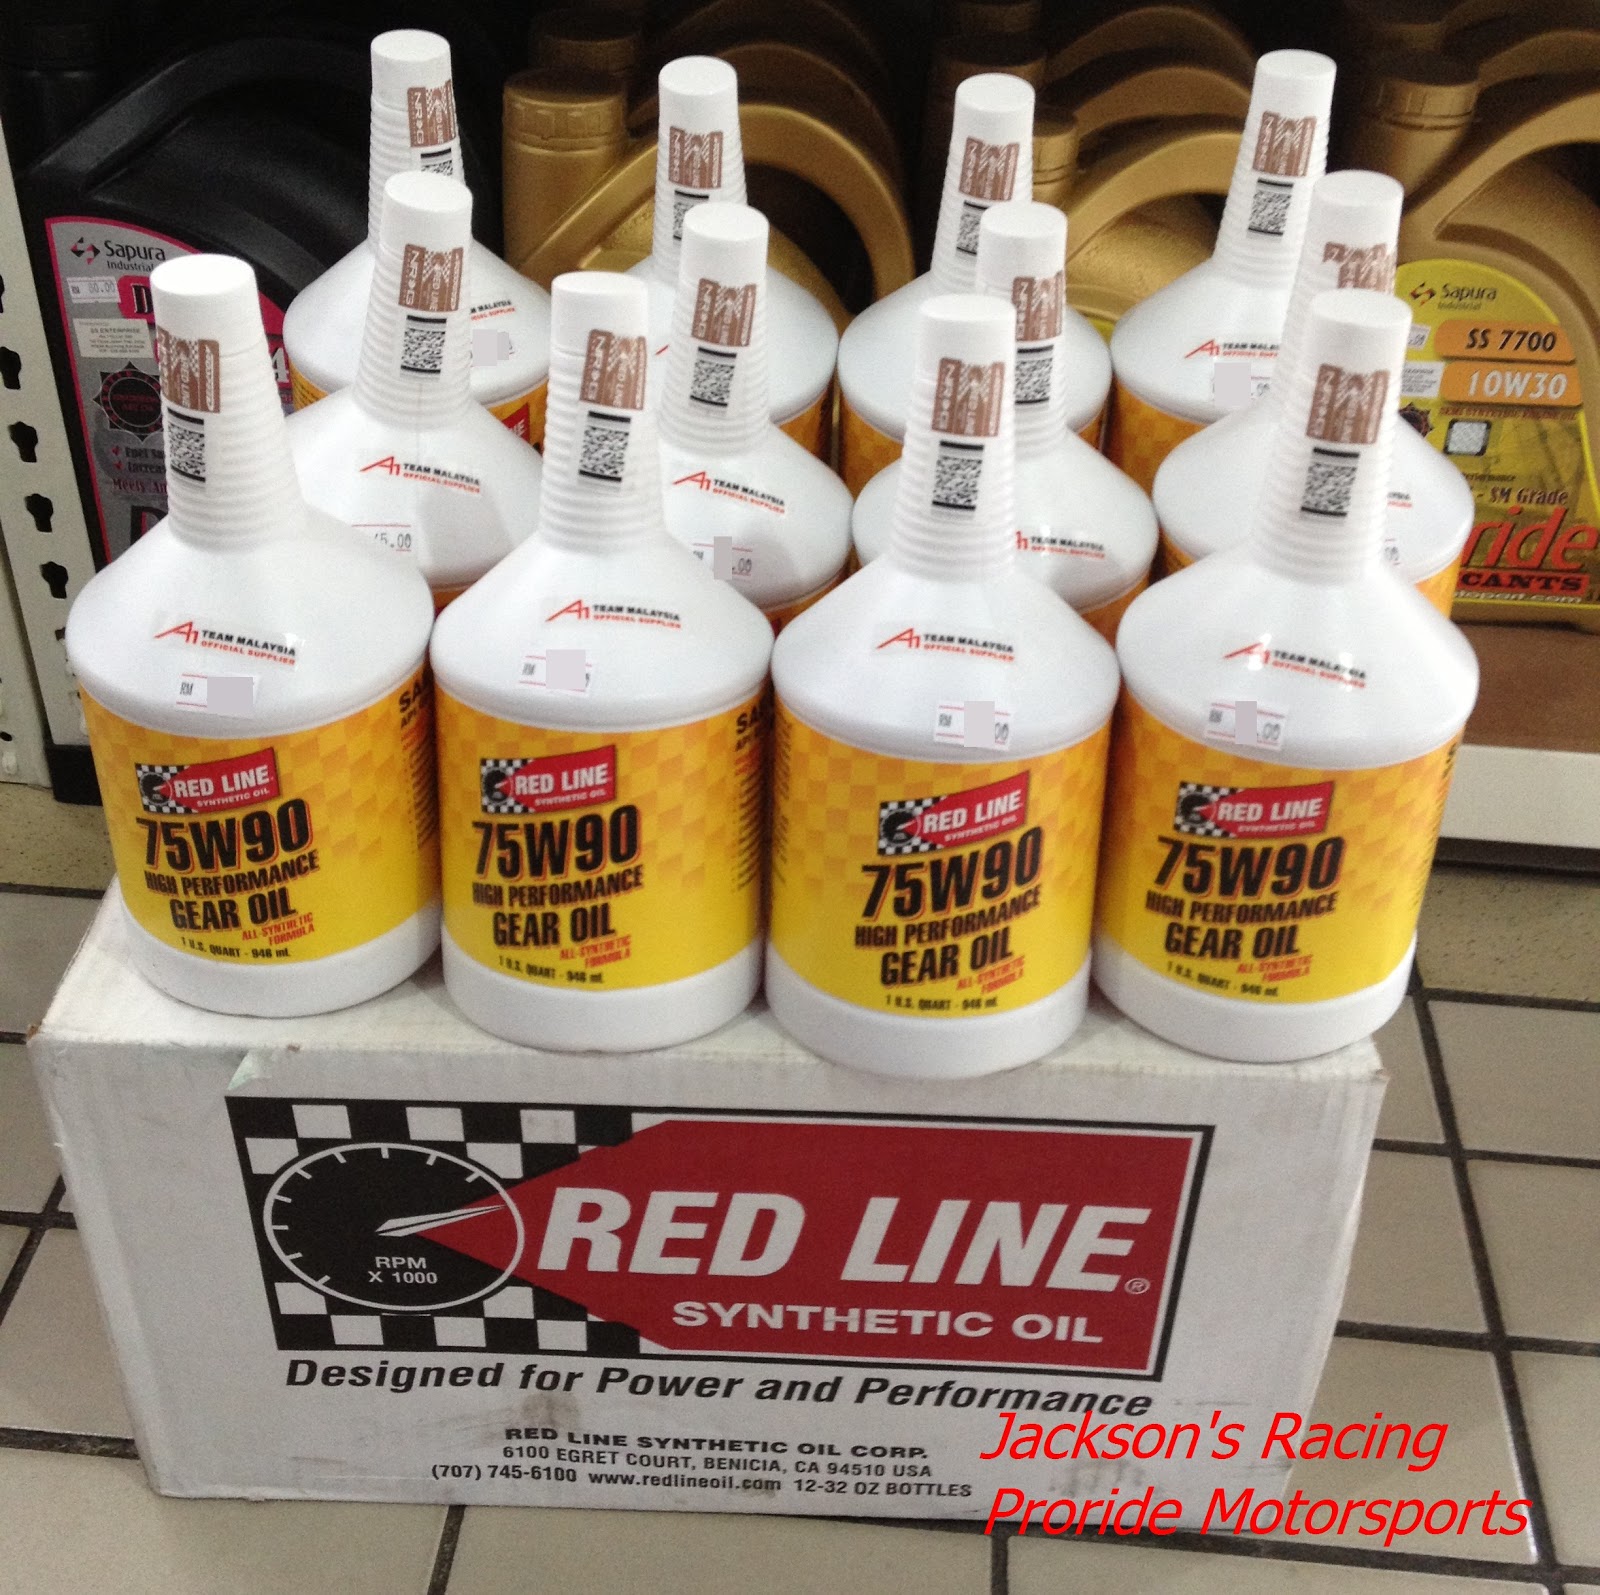 Pro-ride Motorsports: Red Line 75W-90 High Performance 